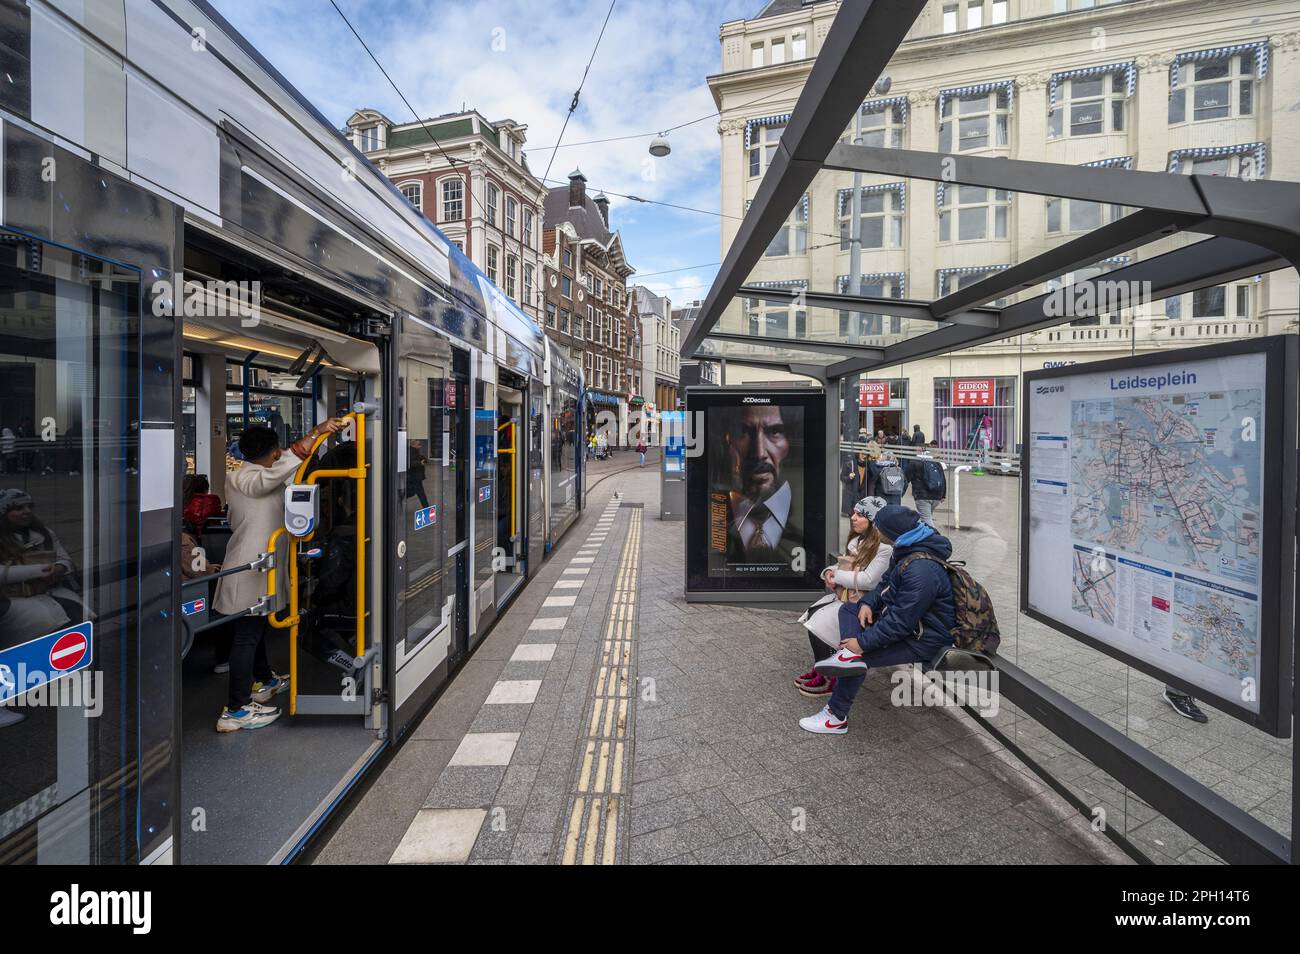 AMSTERDAM - Tram 12 in the center of Amsterdam. Public transport in the capital is being overhauled because the number of travelers has decreased due to the corona crisis. ANP EVERT ELZINGA netherlands out - belgium out Stock Photo